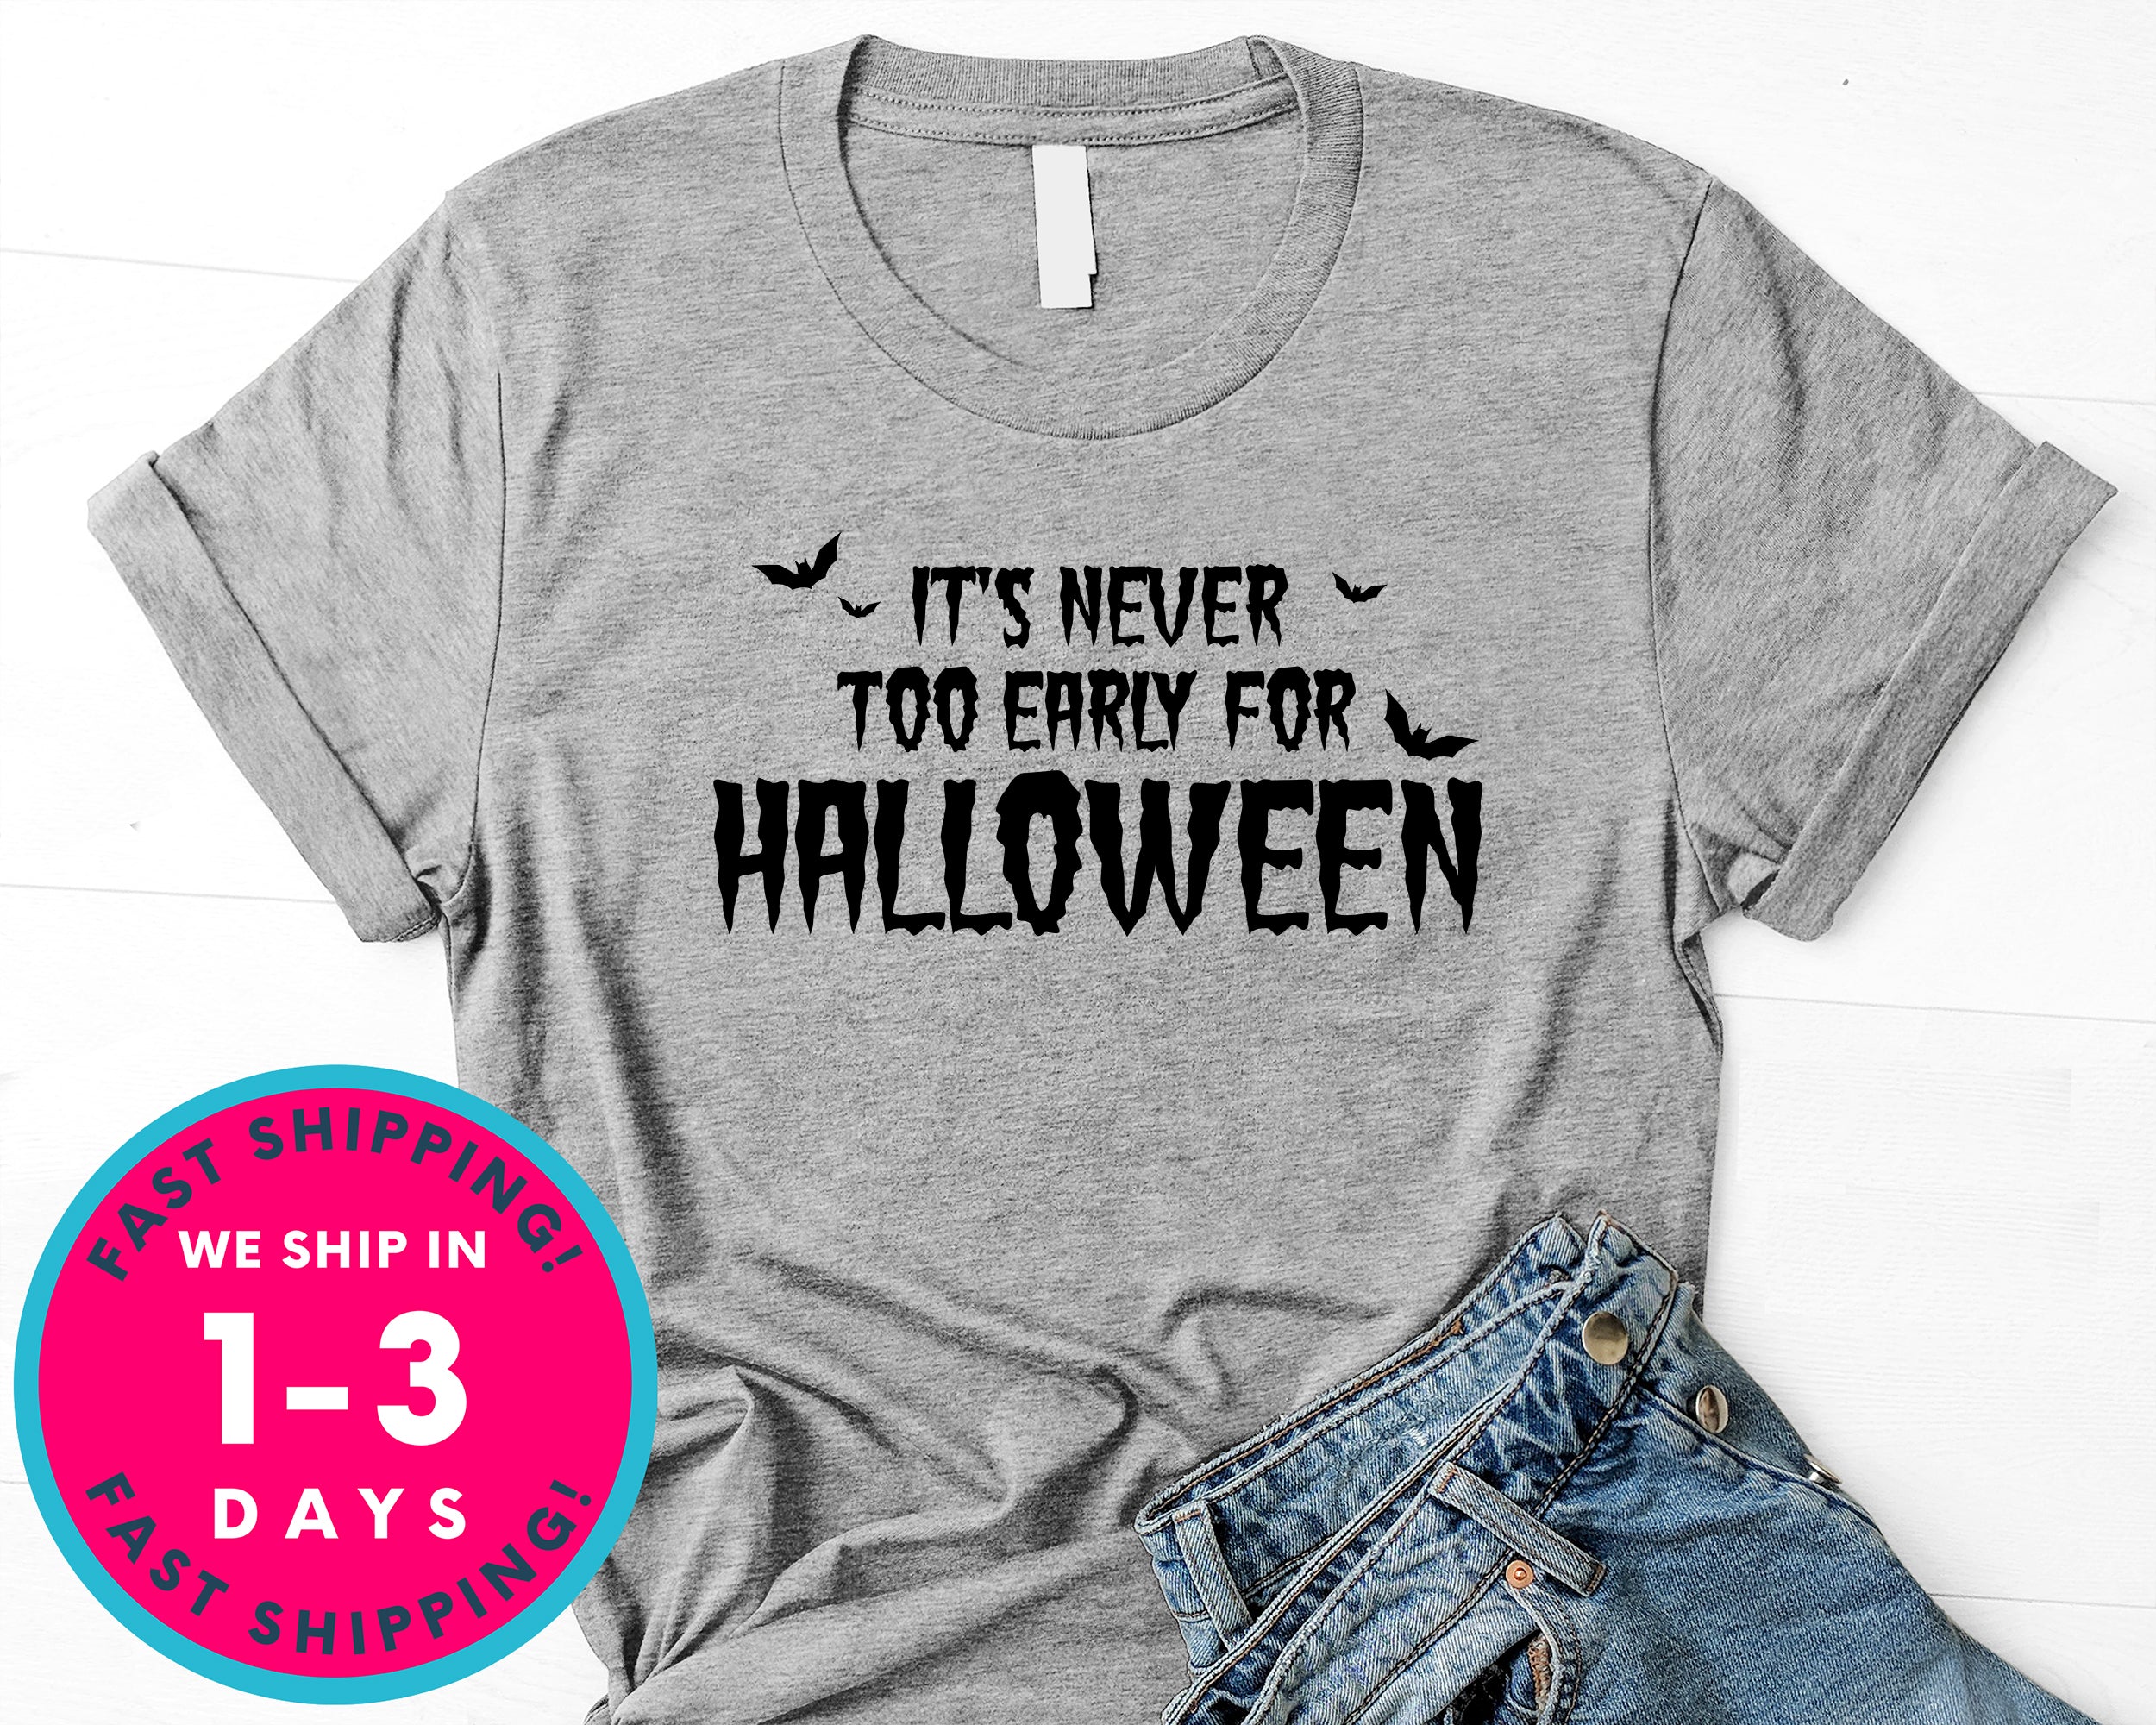 It's Never Too Early For Halloween T-Shirt - Halloween Horror Scary Shirt